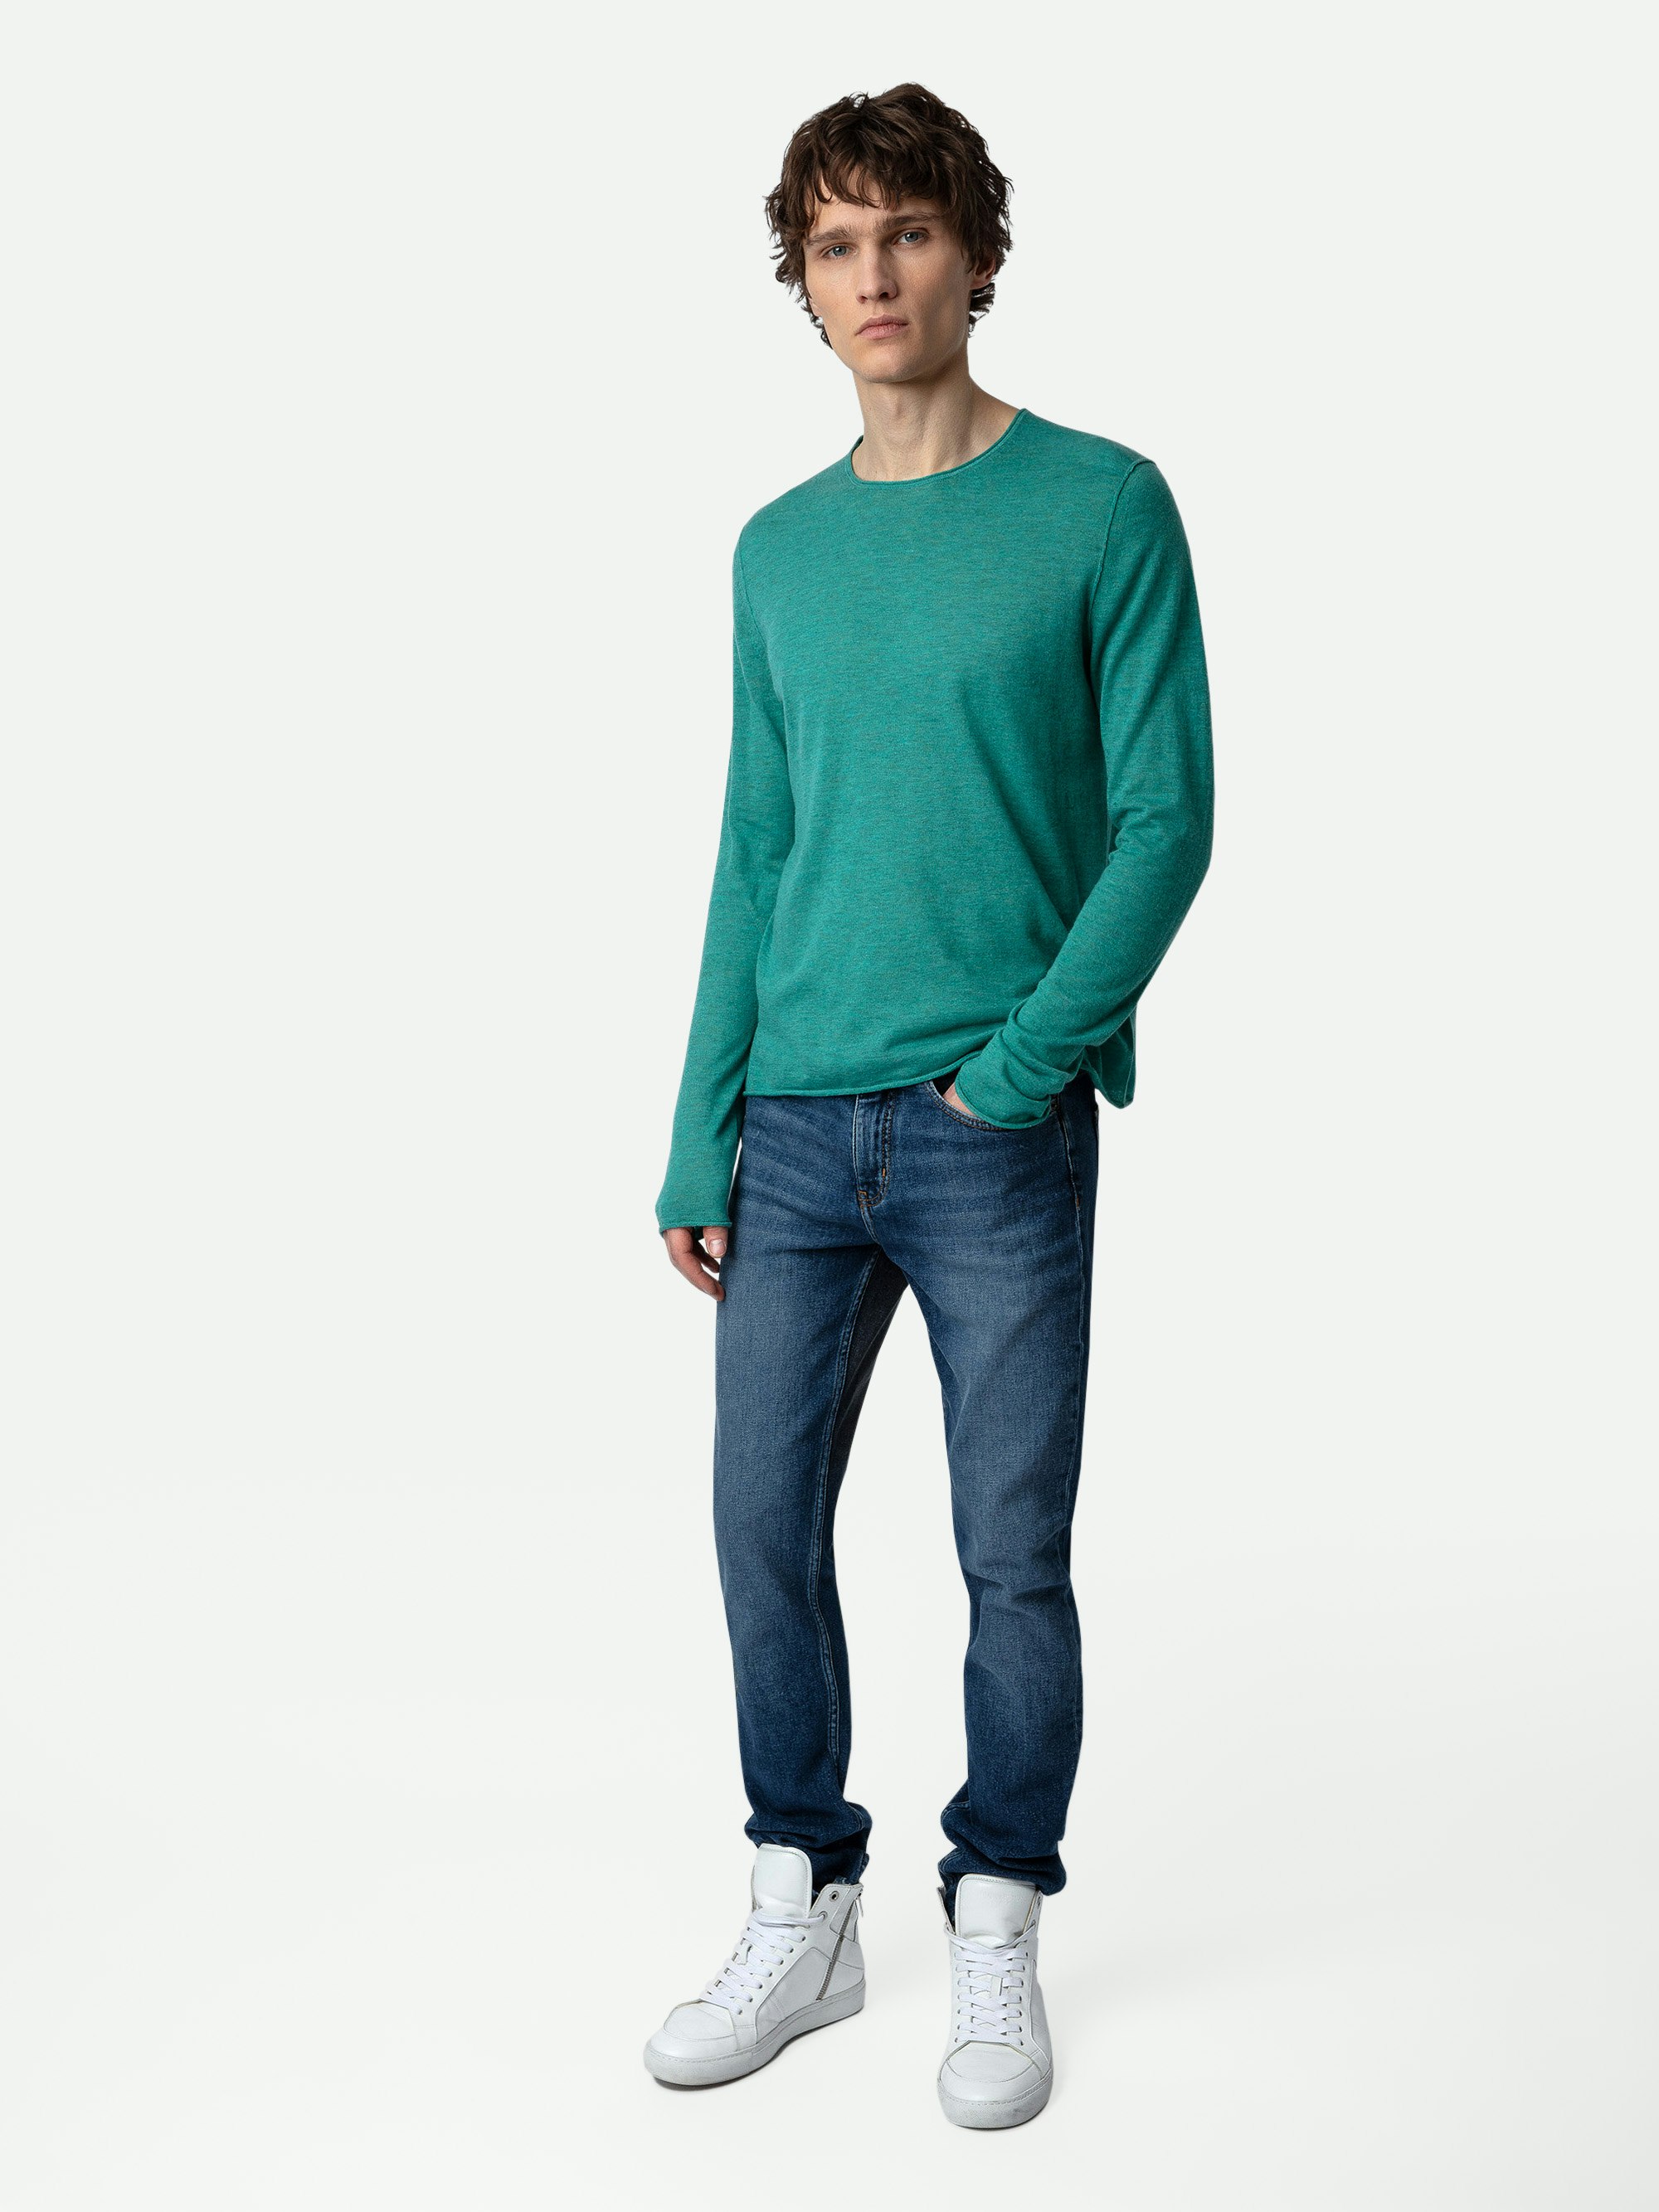 Teiss Cashmere Sweater - Blue green feather cashmere sweater with round neckline and long sleeves.